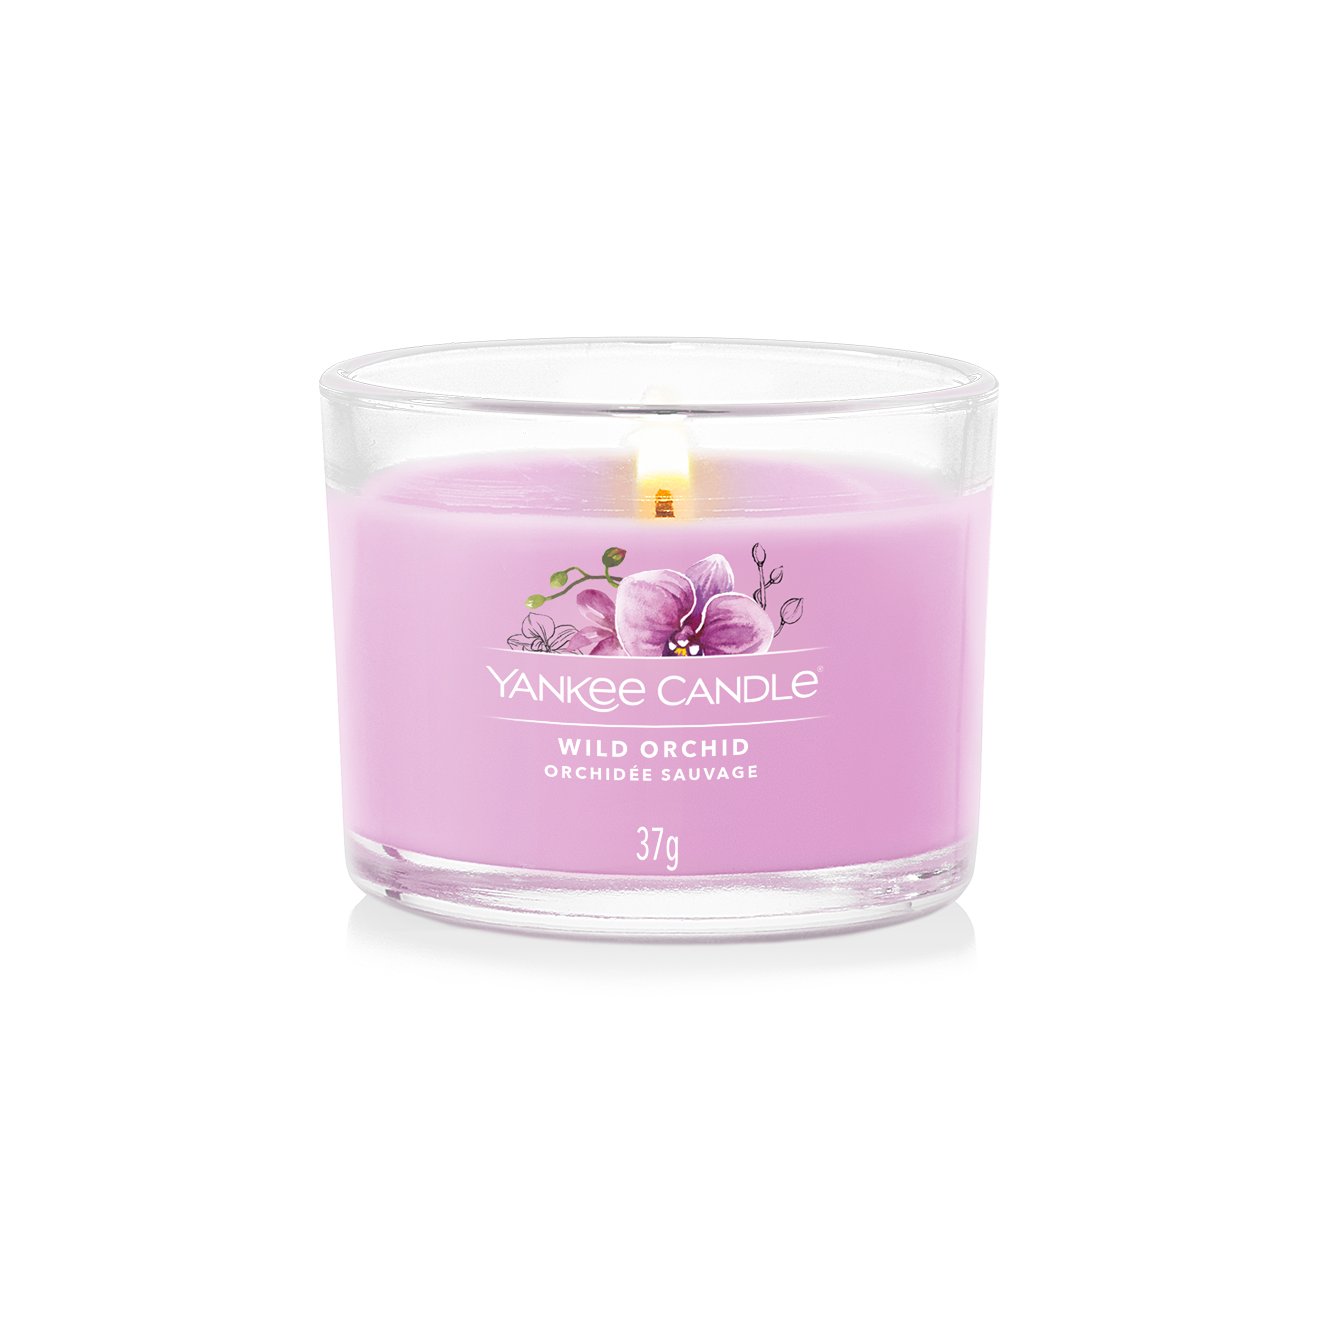 Wild Orchid Yankee Candle® Mini - Single Filled Votives